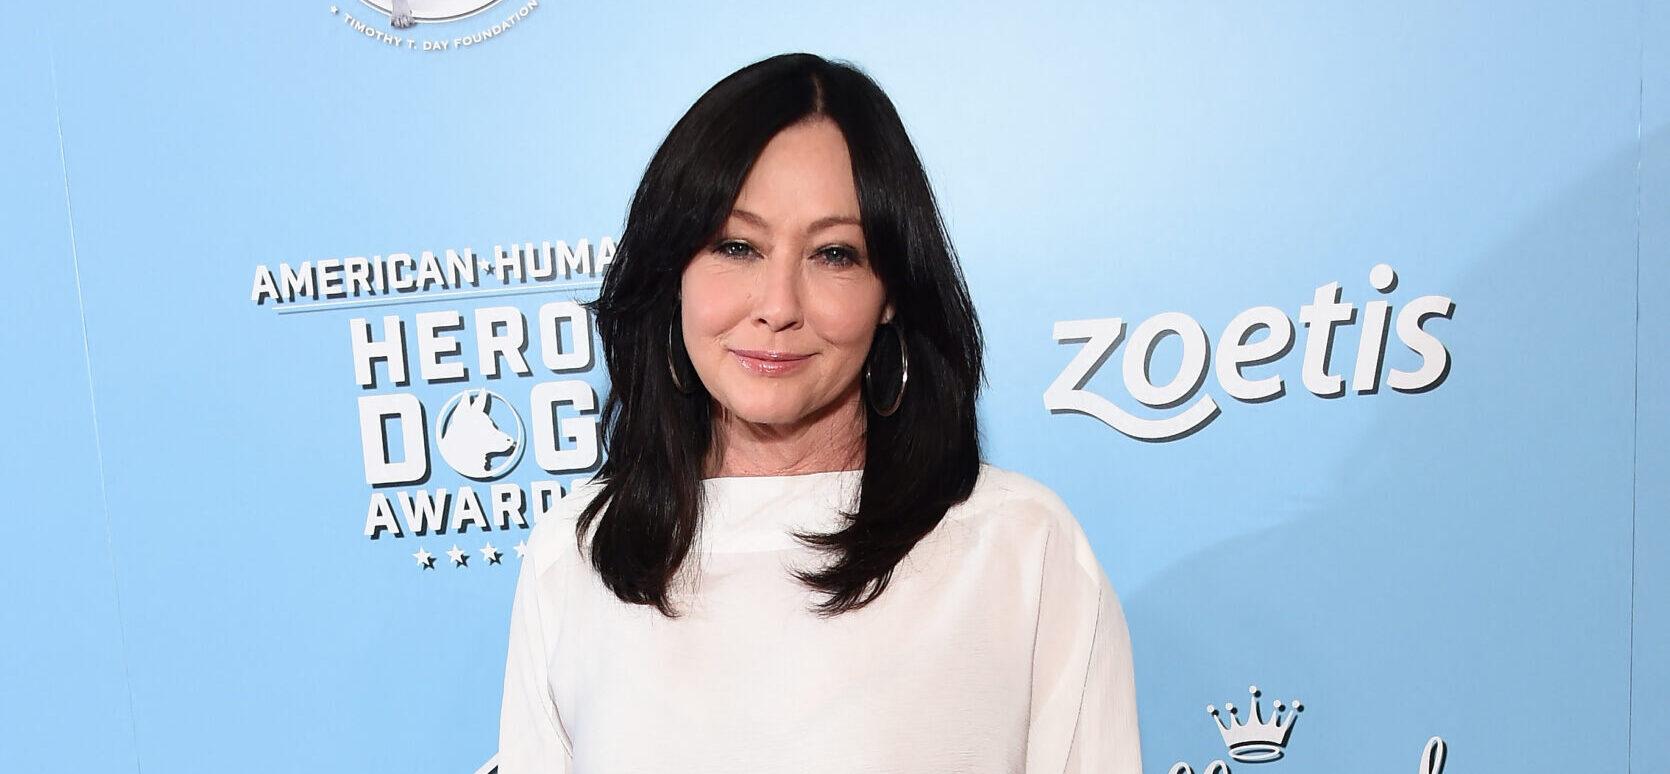 Shannen Doherty Shares Heartbreaking Cancer Update: ‘My Fear Is Obvious’